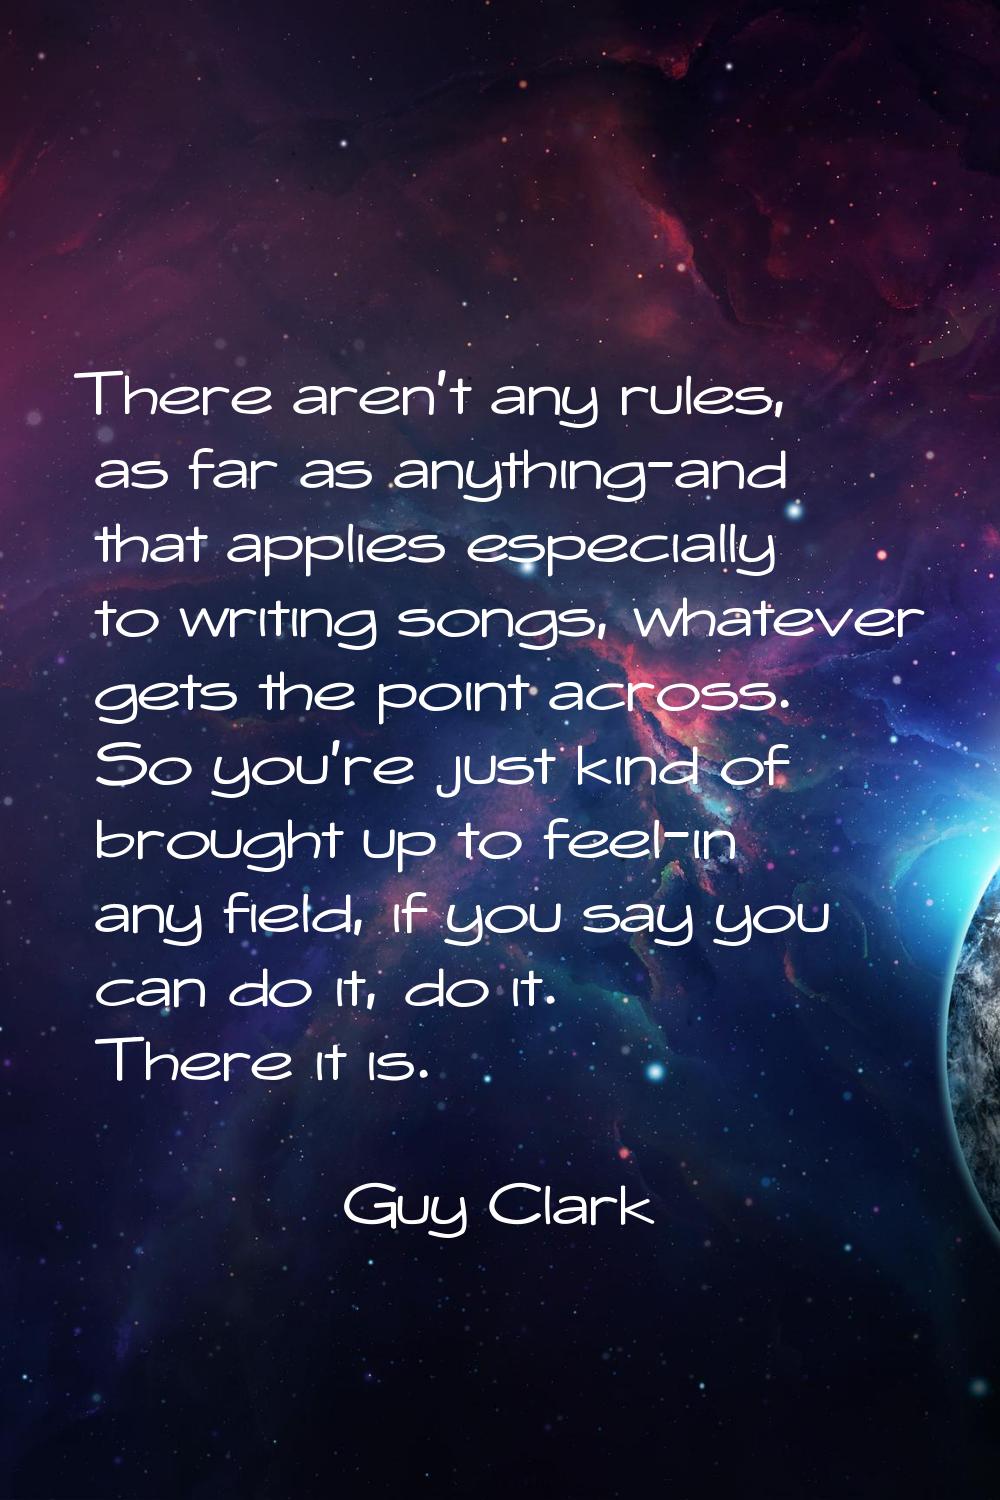 There aren't any rules, as far as anything-and that applies especially to writing songs, whatever g